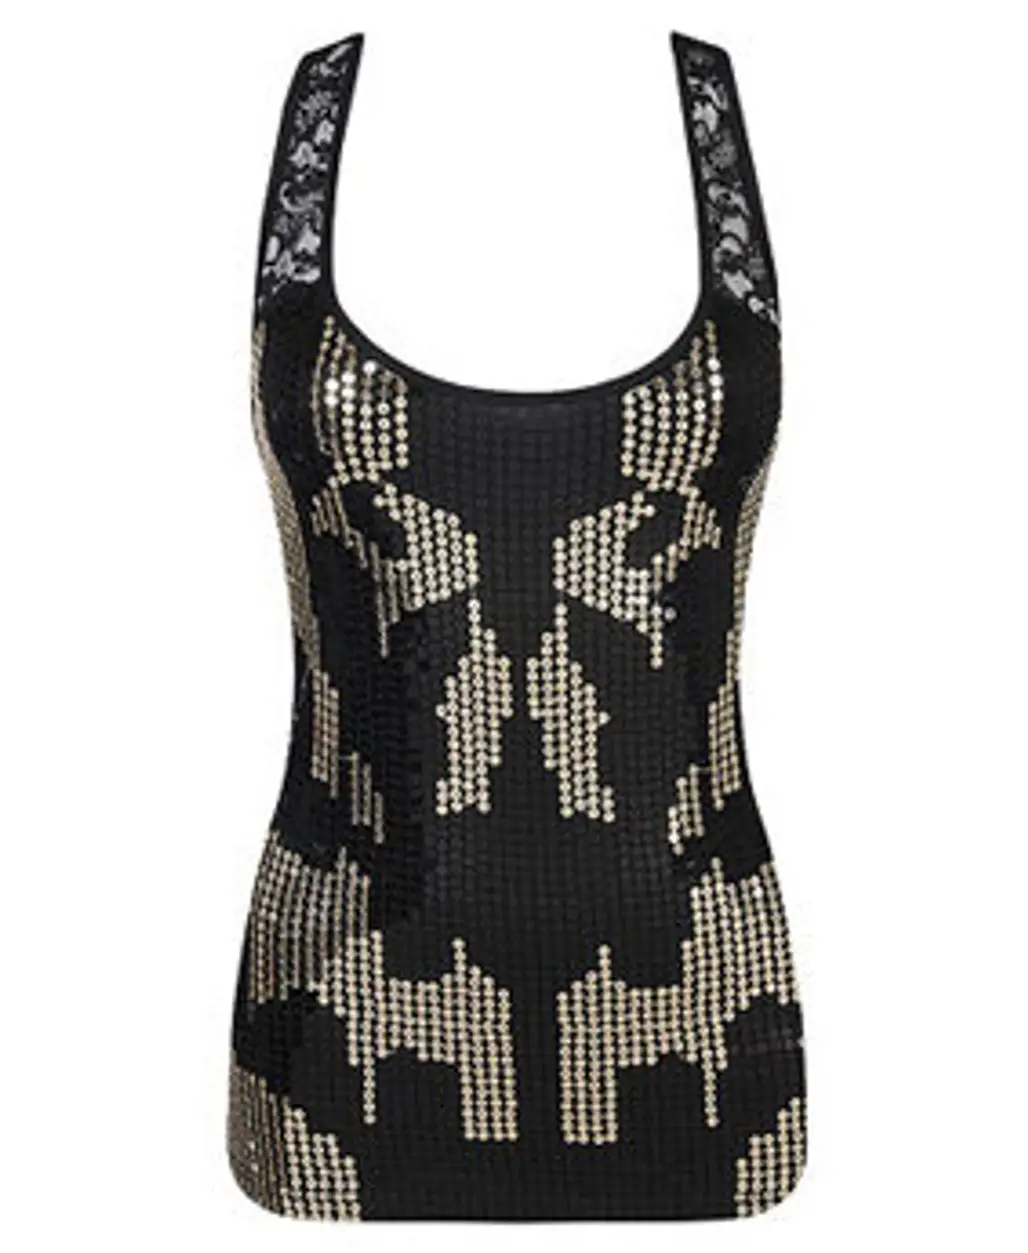 2. Forever 21 Lace Yoke Sequin Tank